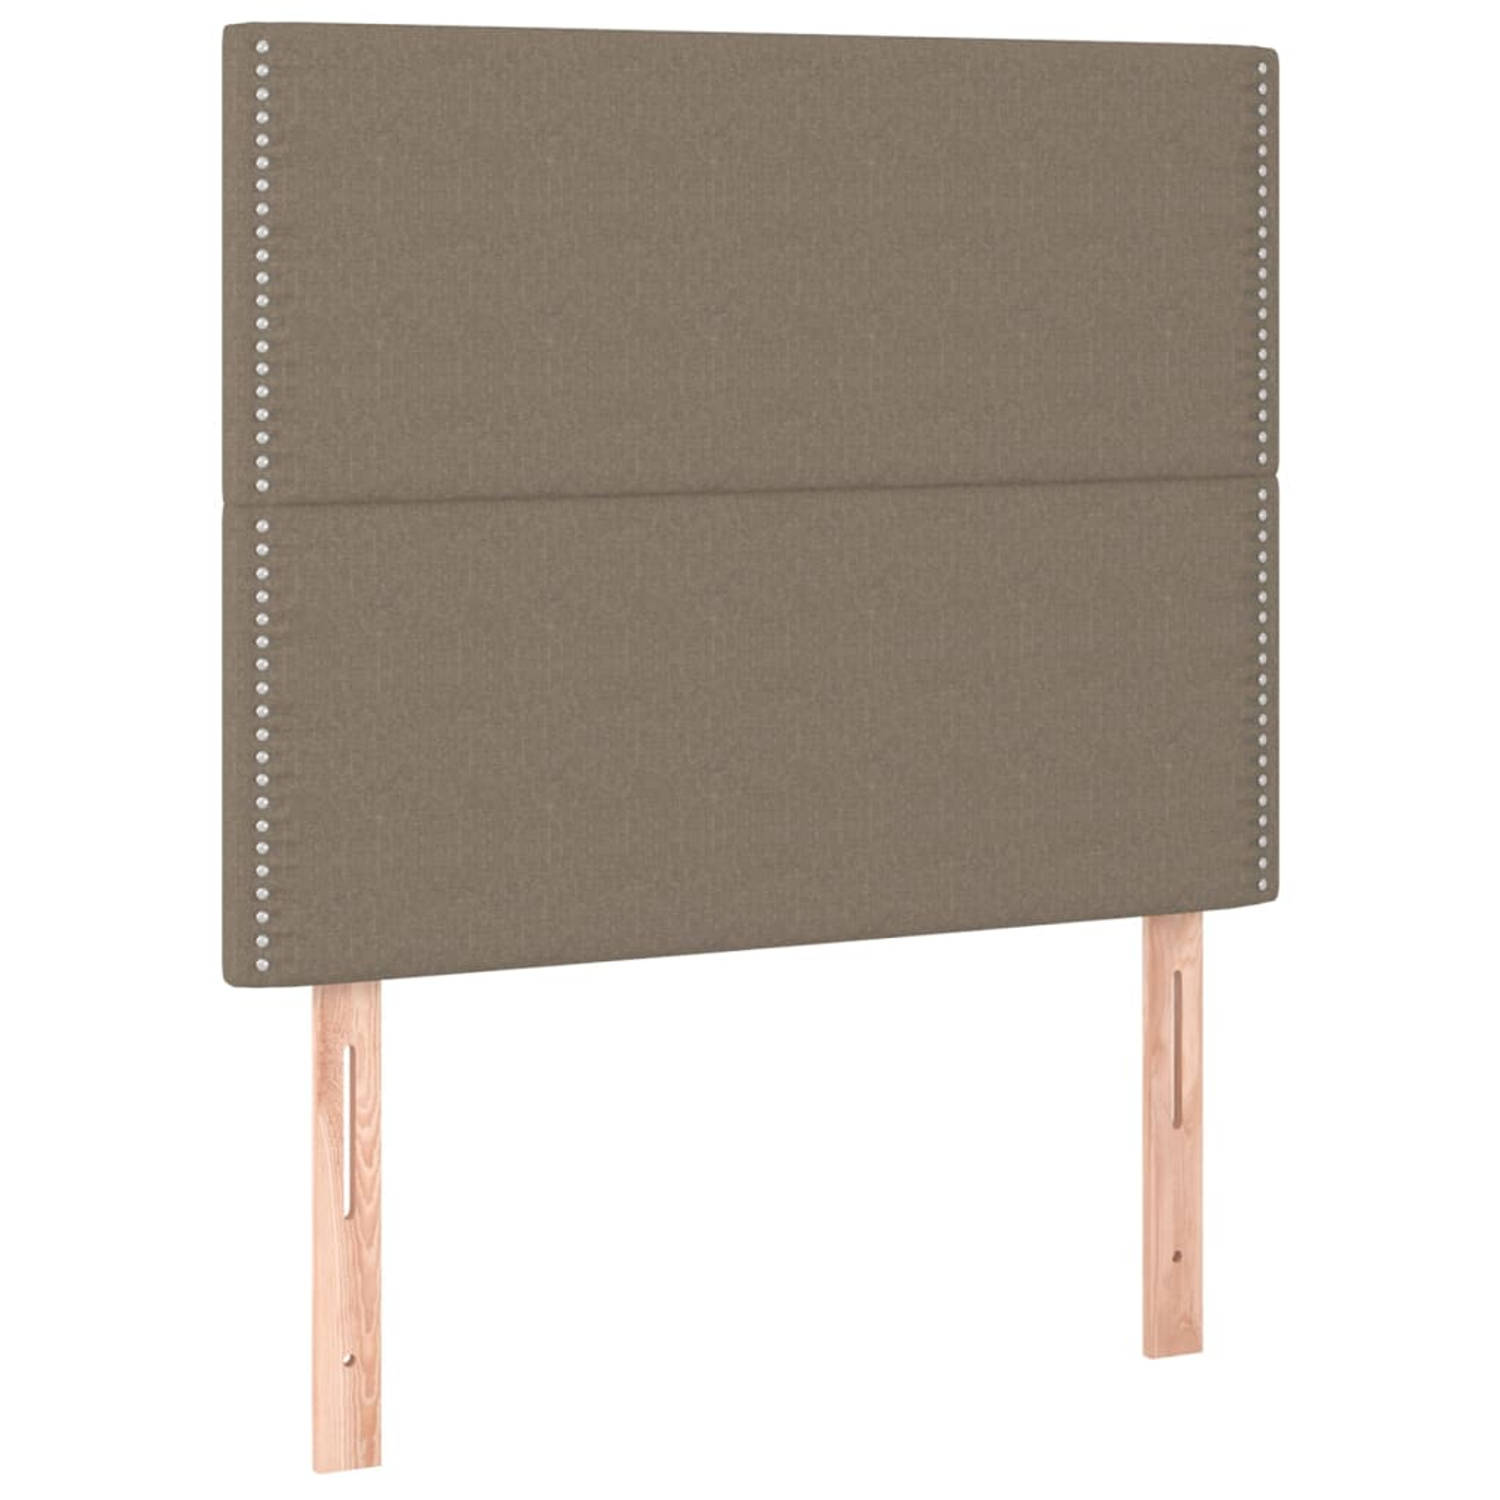 The Living Store Hoofdbord - Hoofdeind 2x - Taupe - 100 x 5 x 118/128 cm - Stof - hout